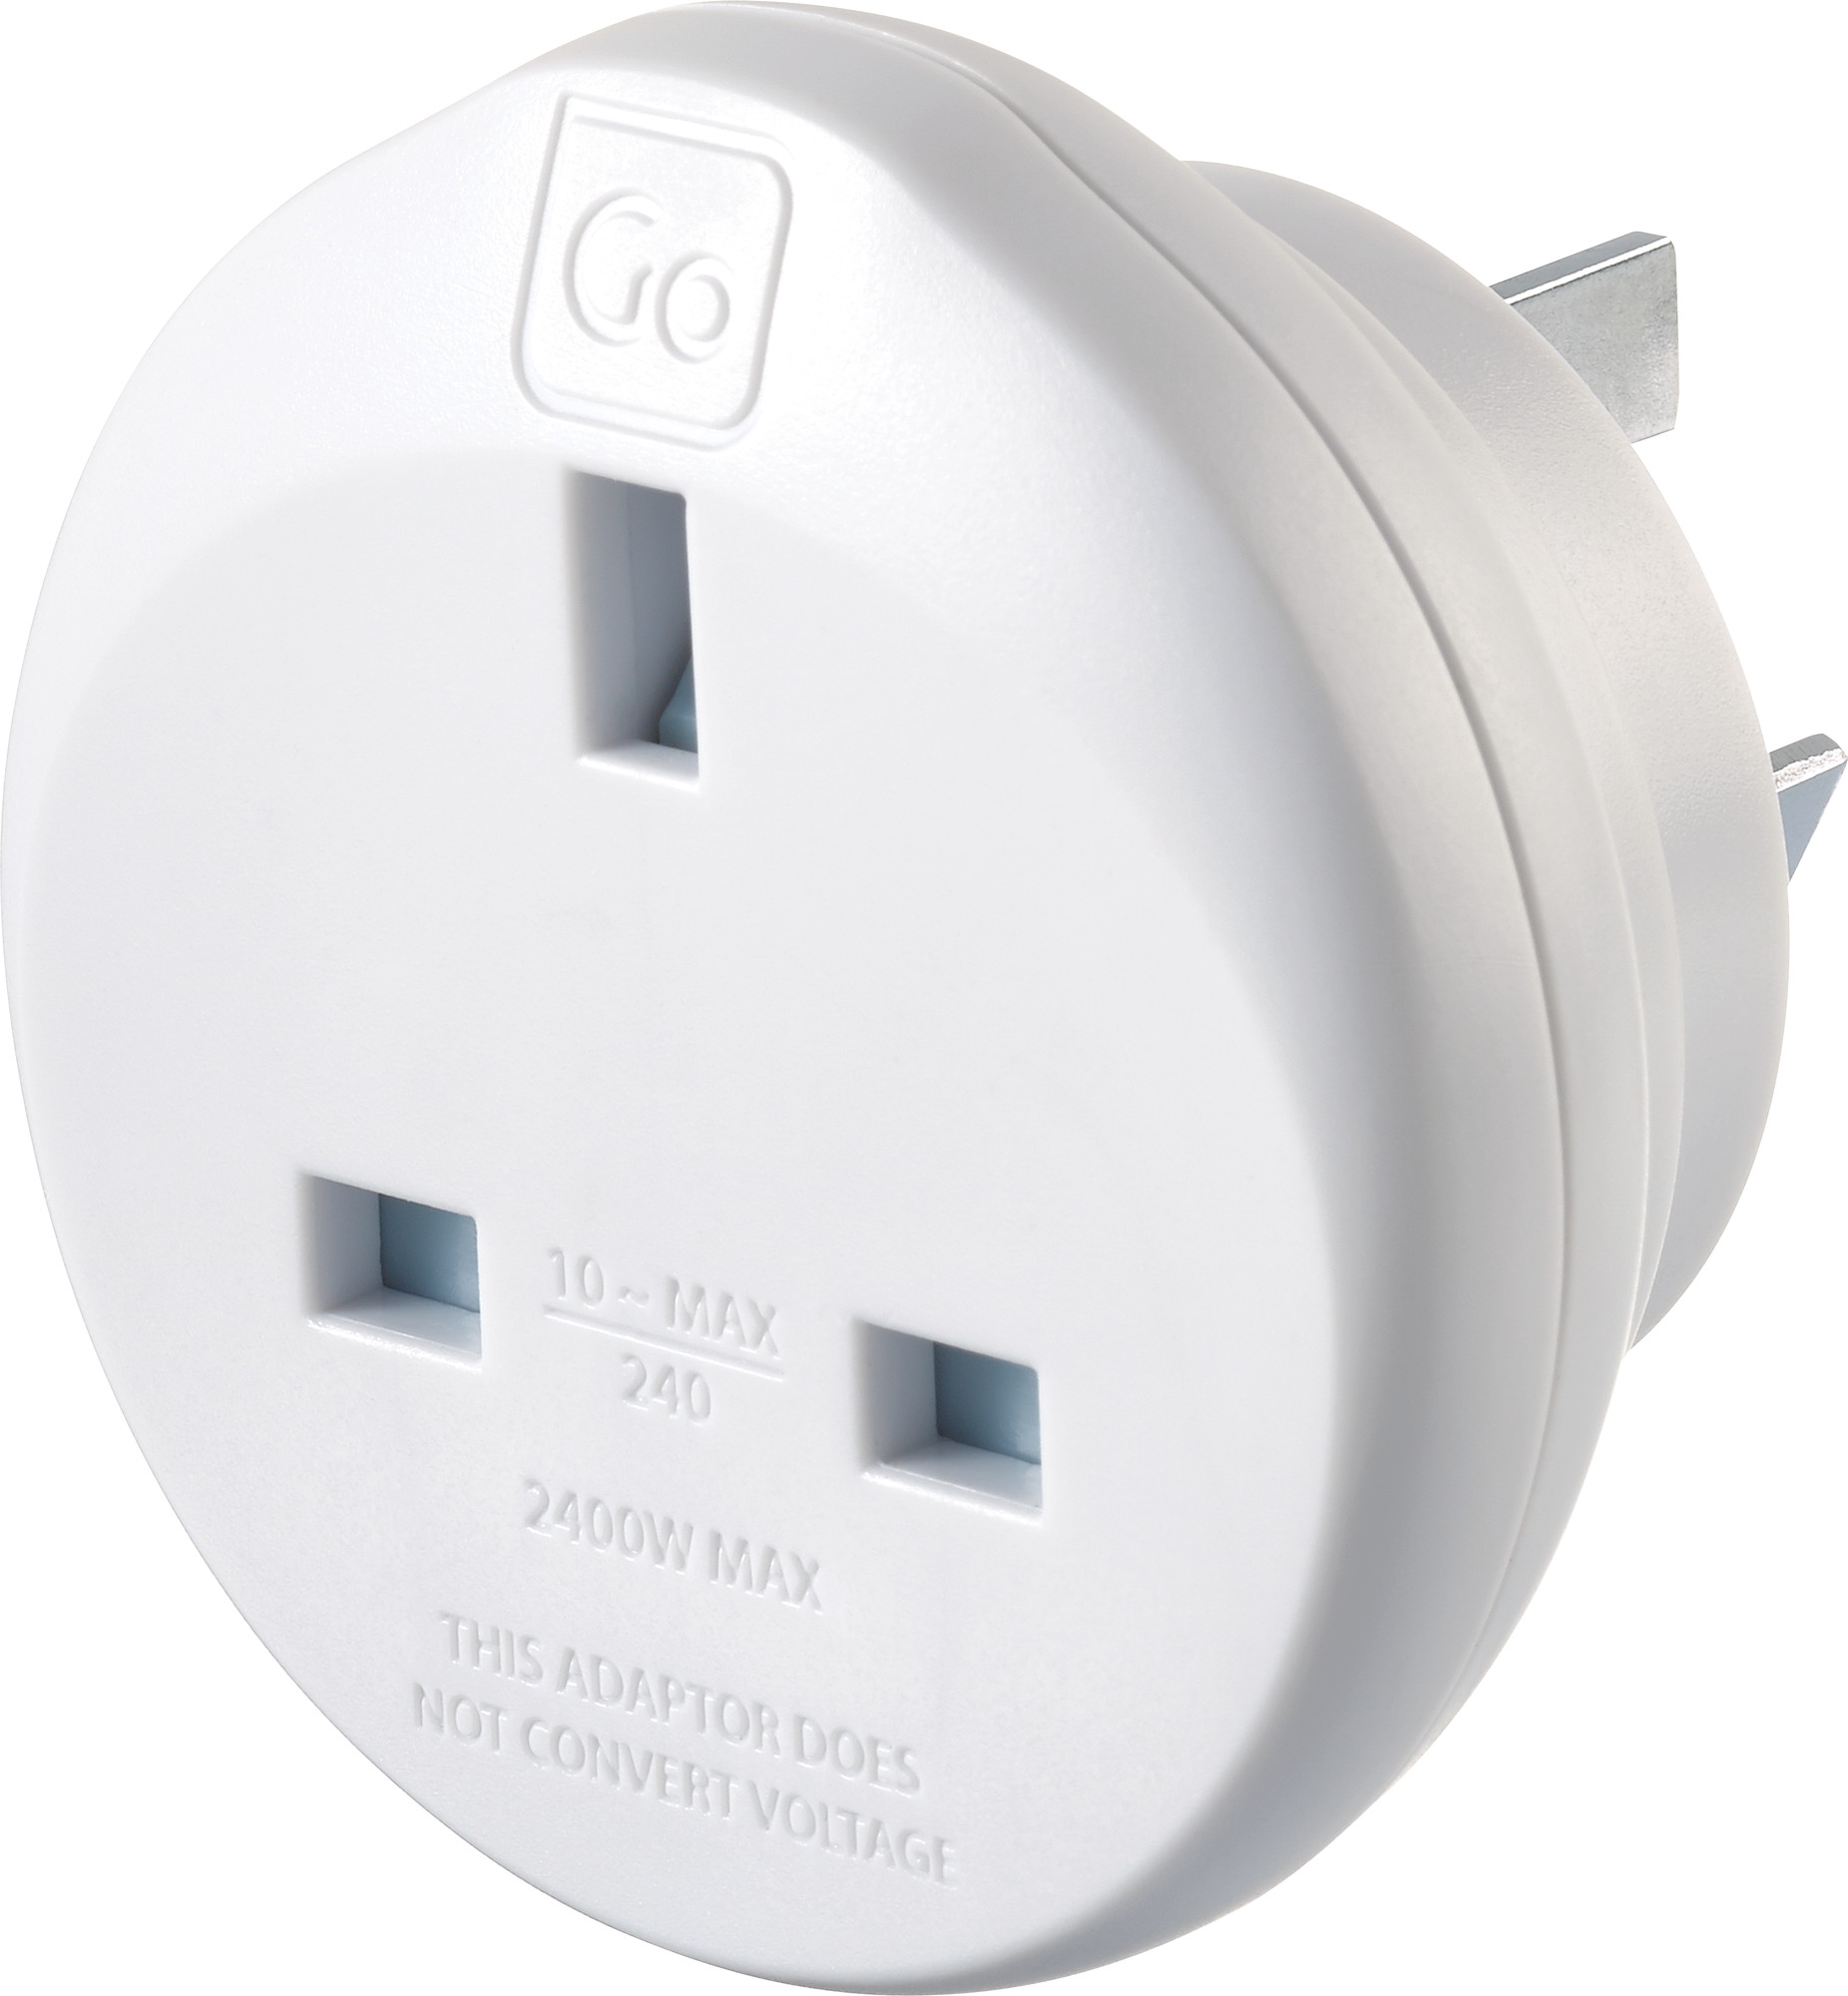 Picture of Go Travel UK Aus Adapter Single